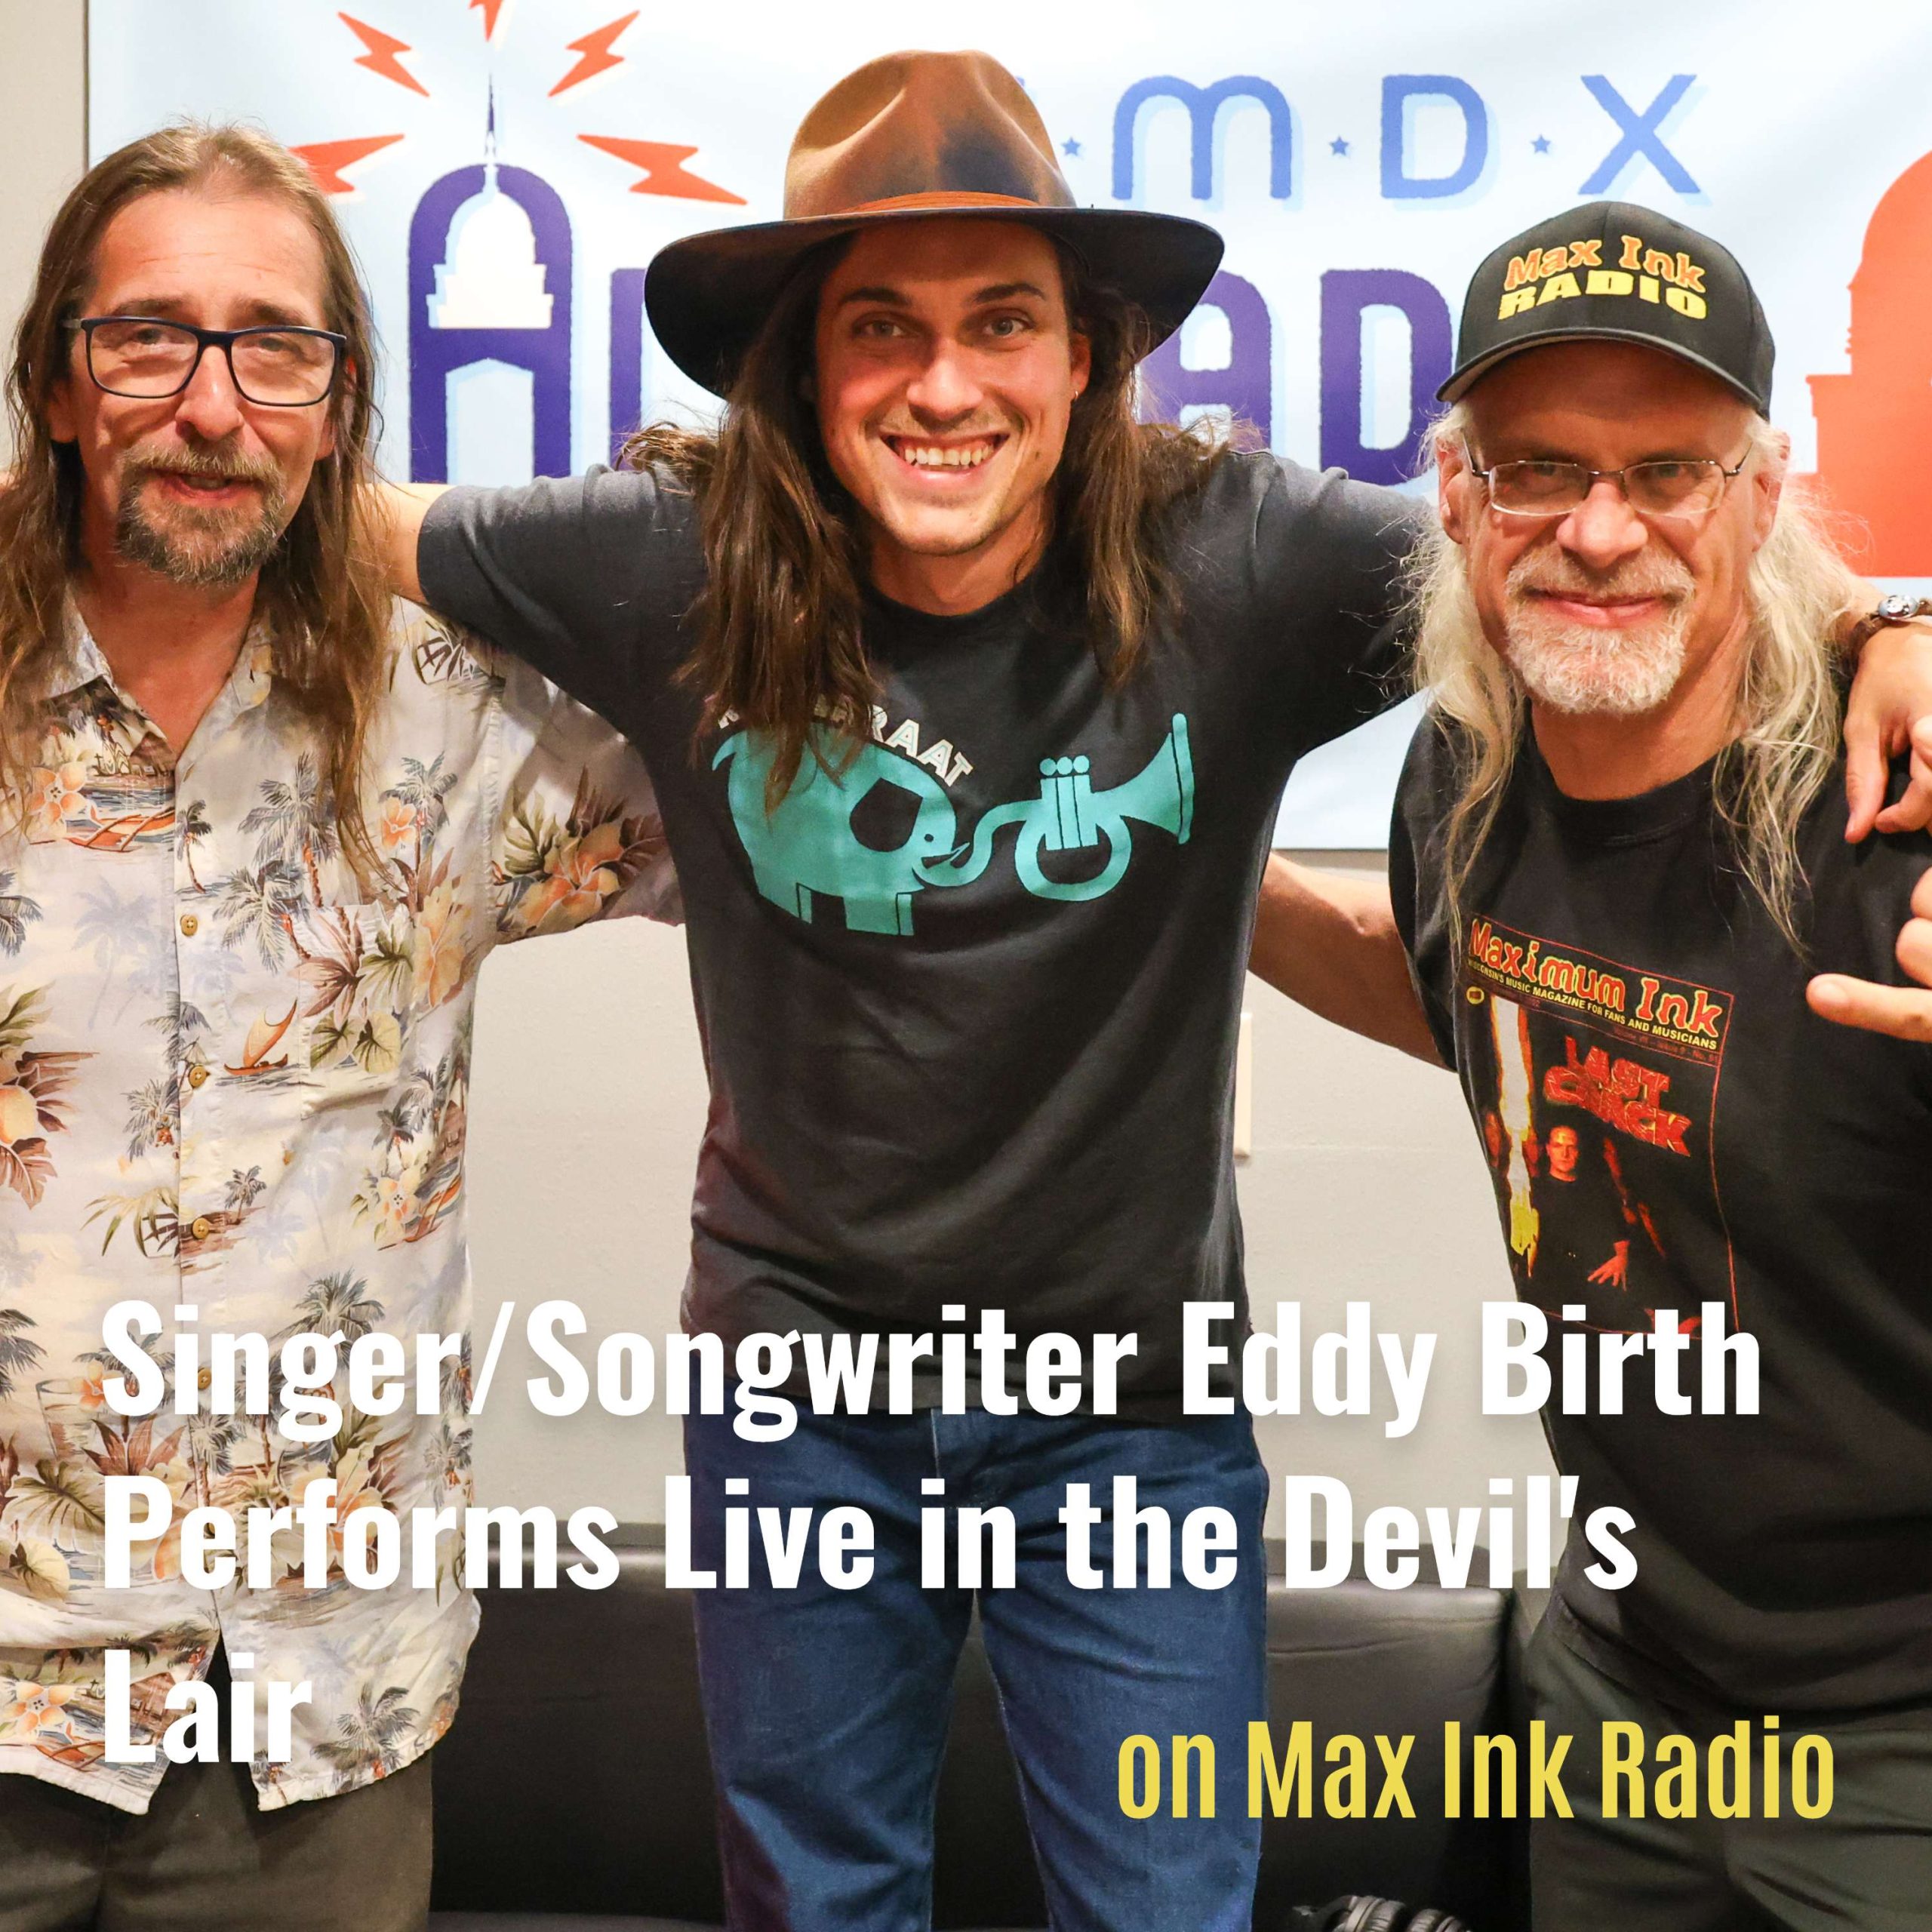 Eddy Birth with Jimmy K & Rökker in the Devil's Lair on Max Ink Radio - photo by Jorge Reyna